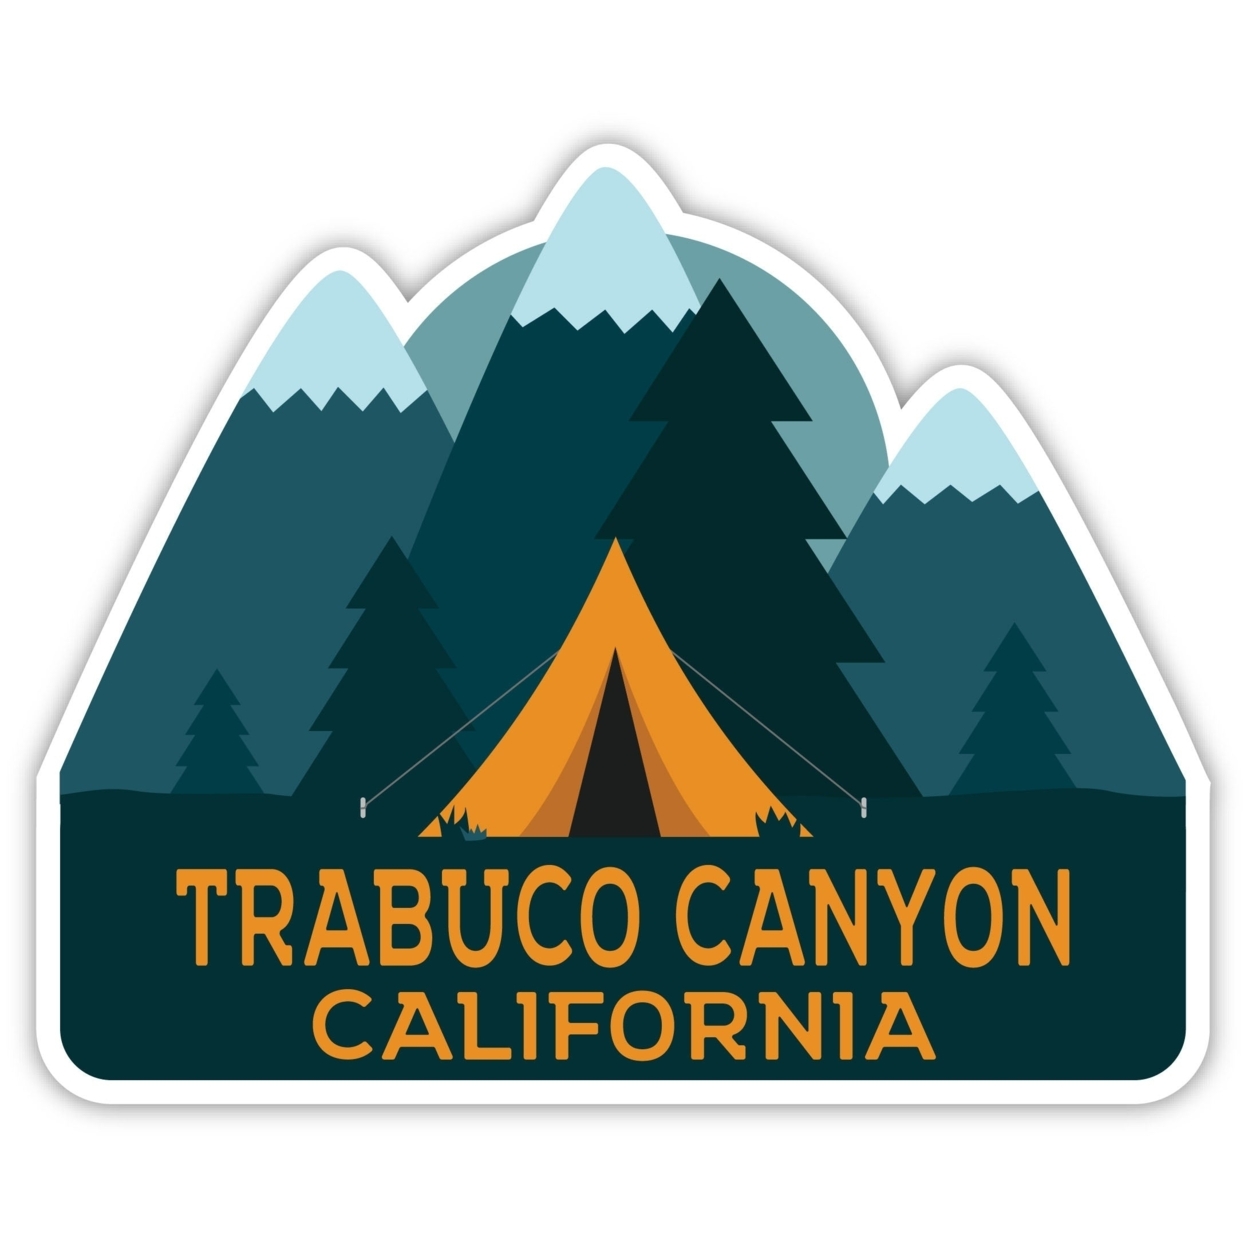 Trabuco Canyon California Souvenir Decorative Stickers (Choose Theme And Size) - Single Unit, 2-Inch, Great Outdoors